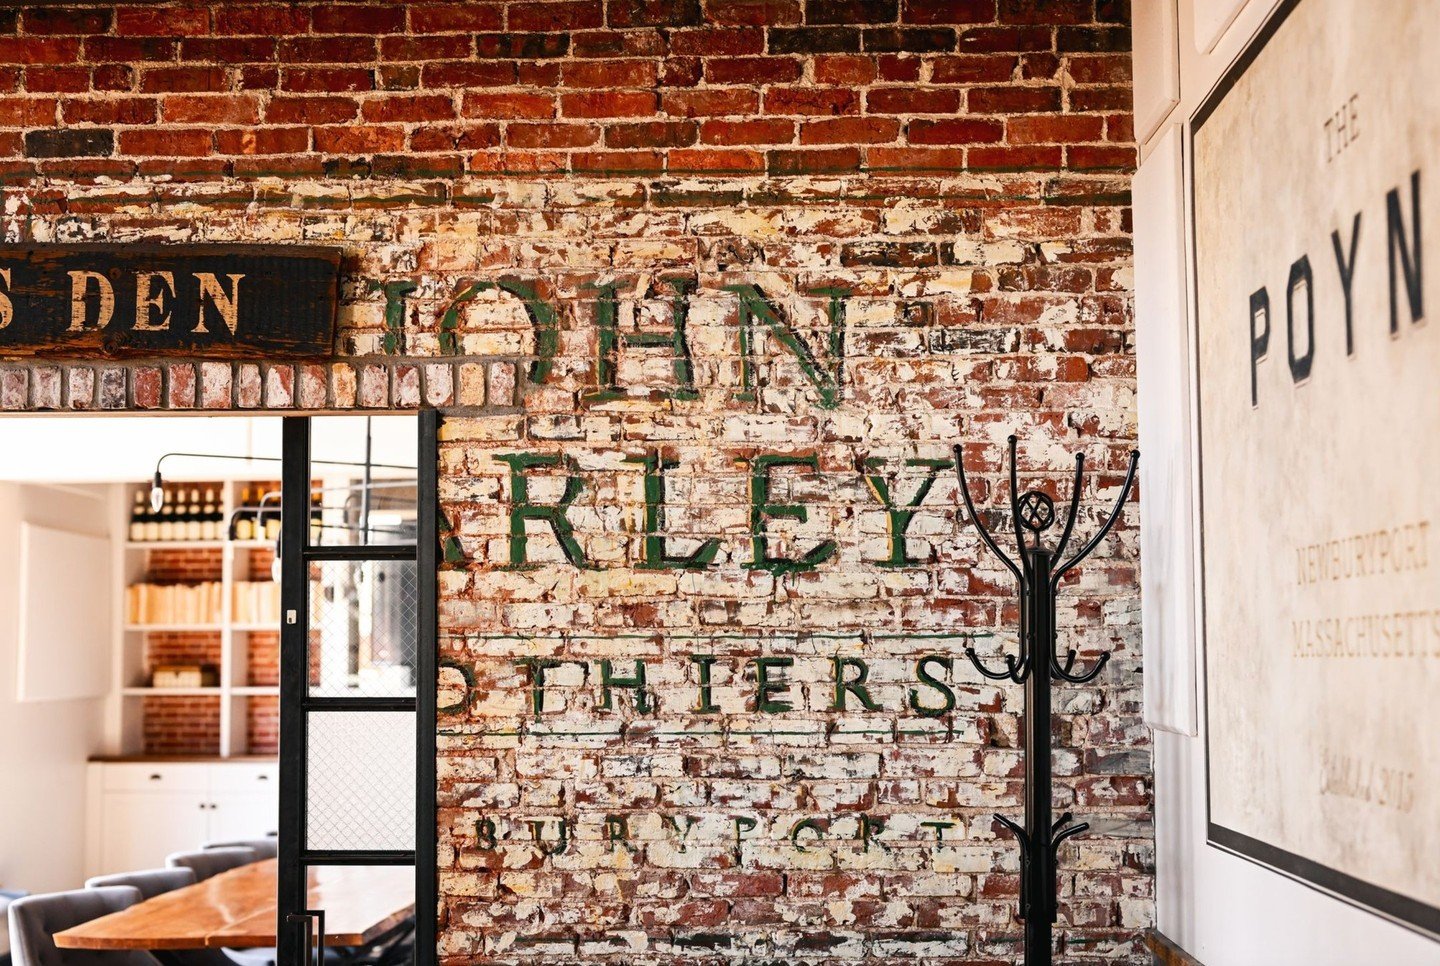 Ever notice the little bit of history hidden on the brick wall near The Wolfe's Den?  Before becoming The Poynt, our space was previously a Men's Clothier called John Farley's.  You may notice a nod to our space's past with the original John Farley's